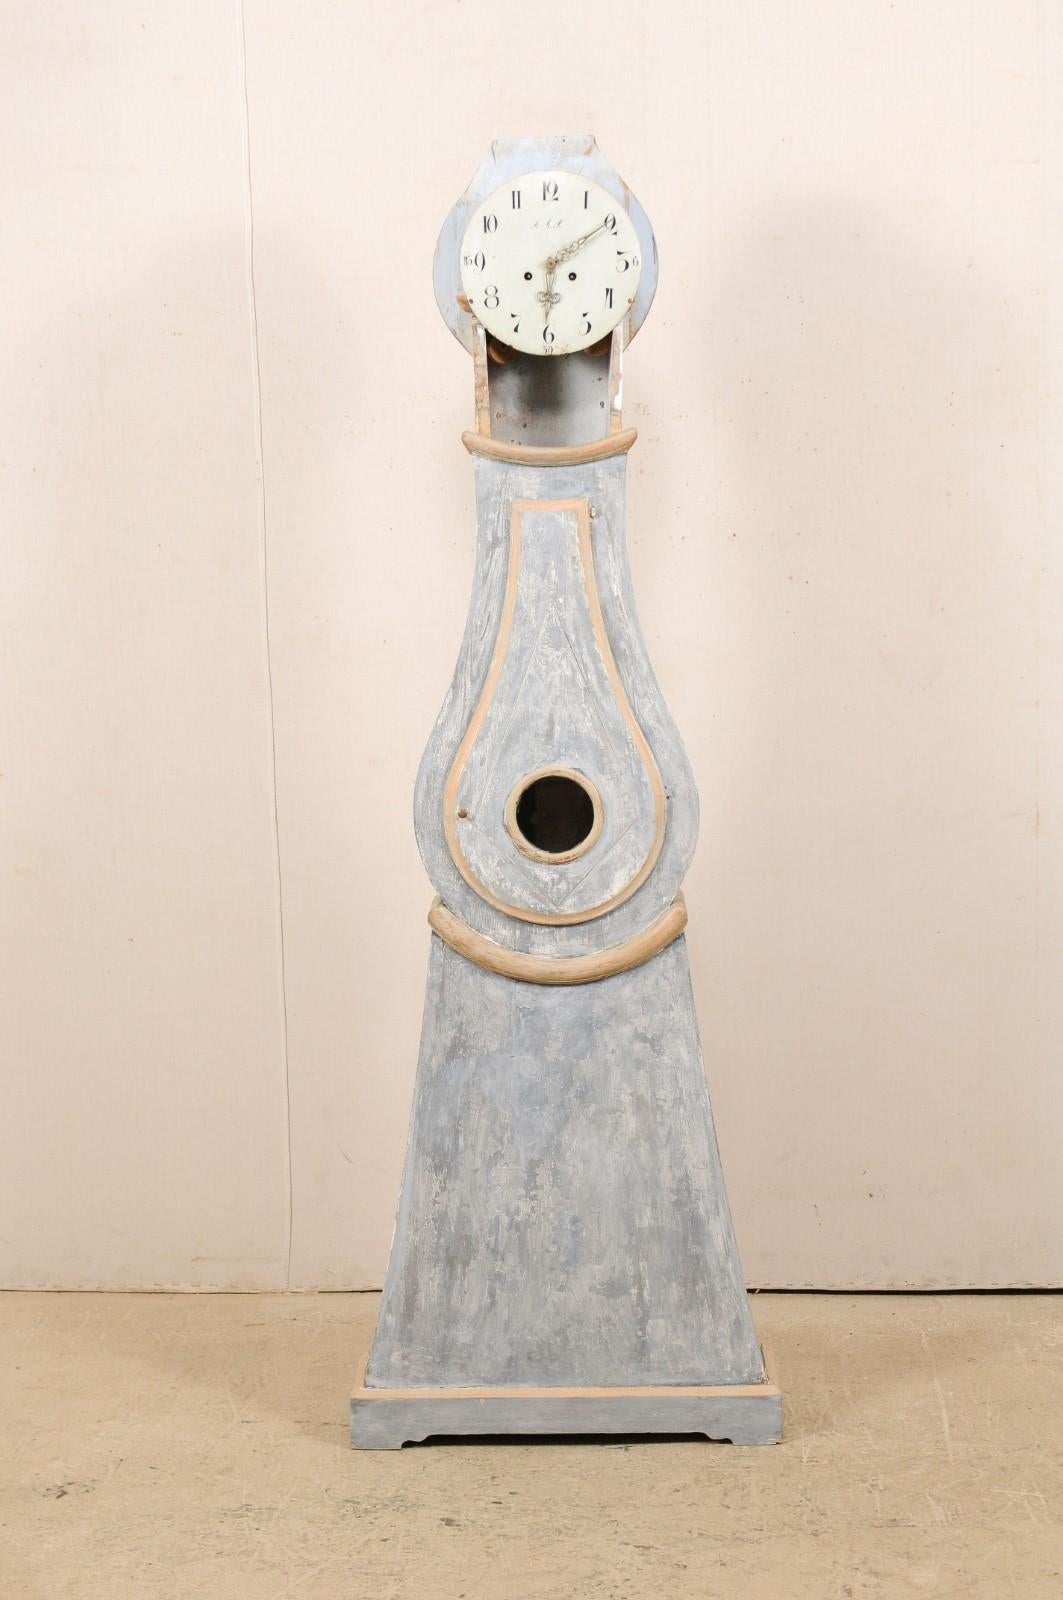 Handsome Early 19th Century Swedish Clock in a Soothing Blue/Gray Palette 3